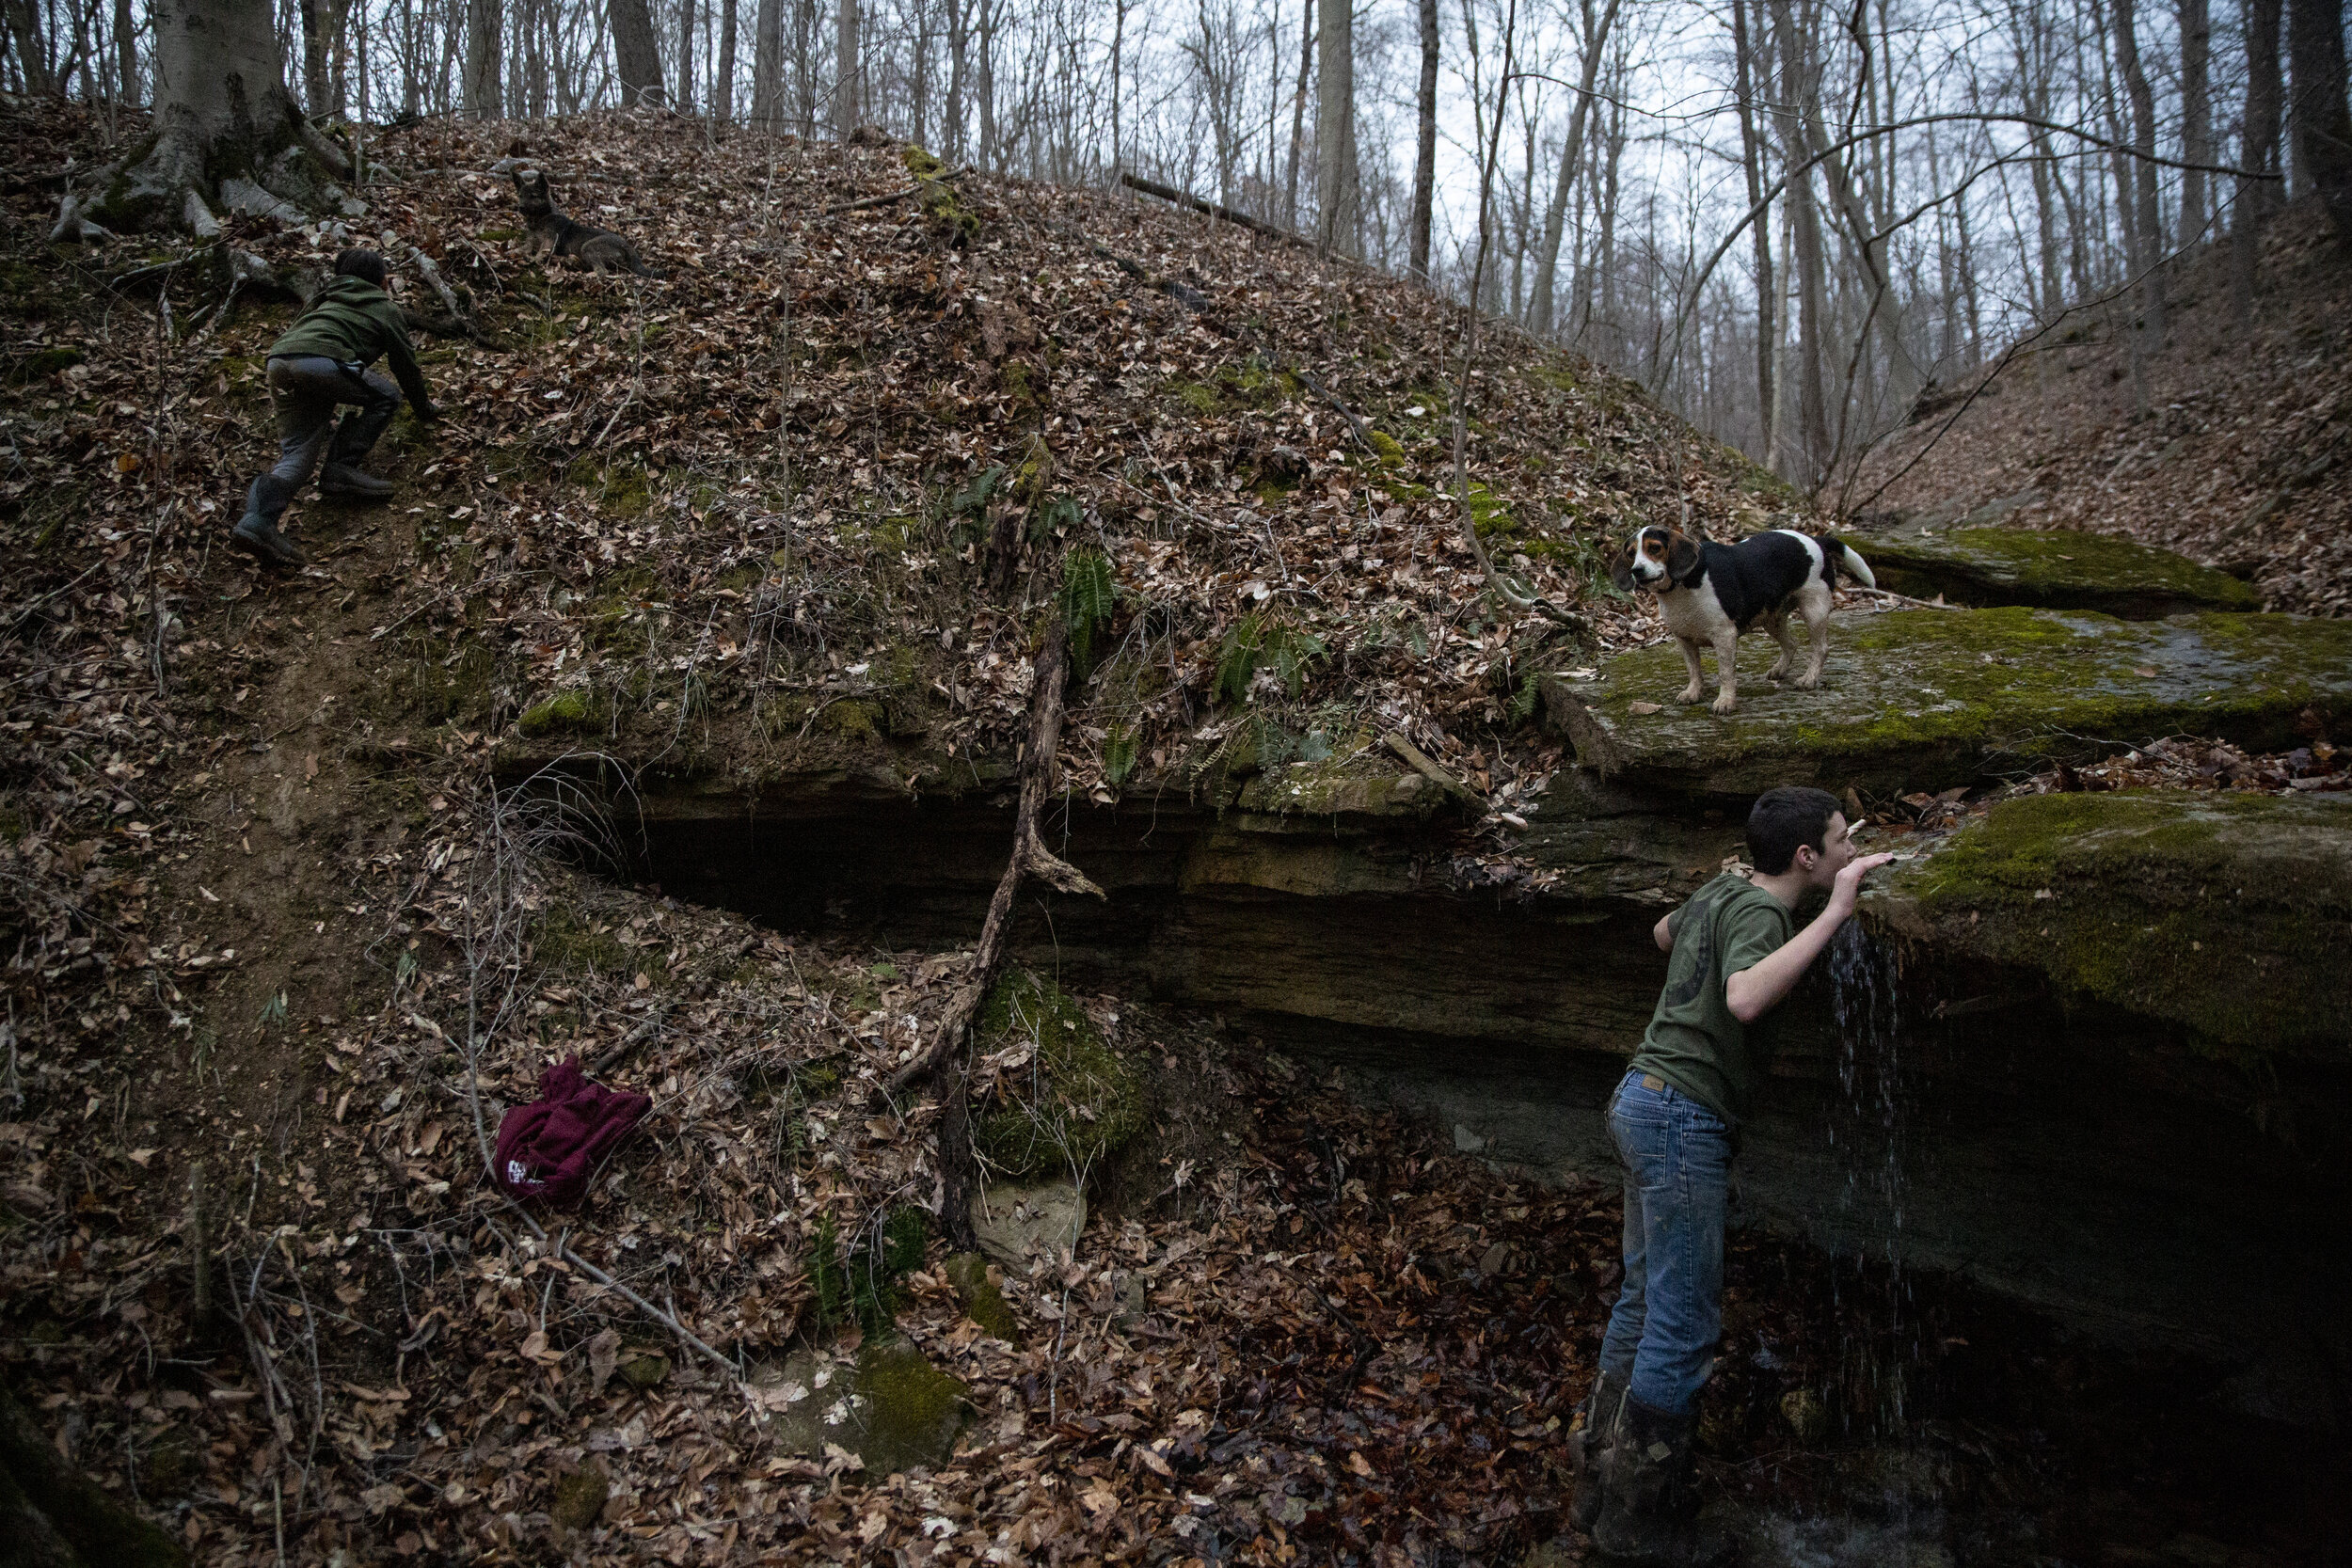  Riley Russell, 13, right, drinks from a stream on his family's property, which used to be mined for coal, while his brother Court, 10, runs uphill. Sharpsburg was an active coal-mining town until the mid-20th century. There have been efforts to resu